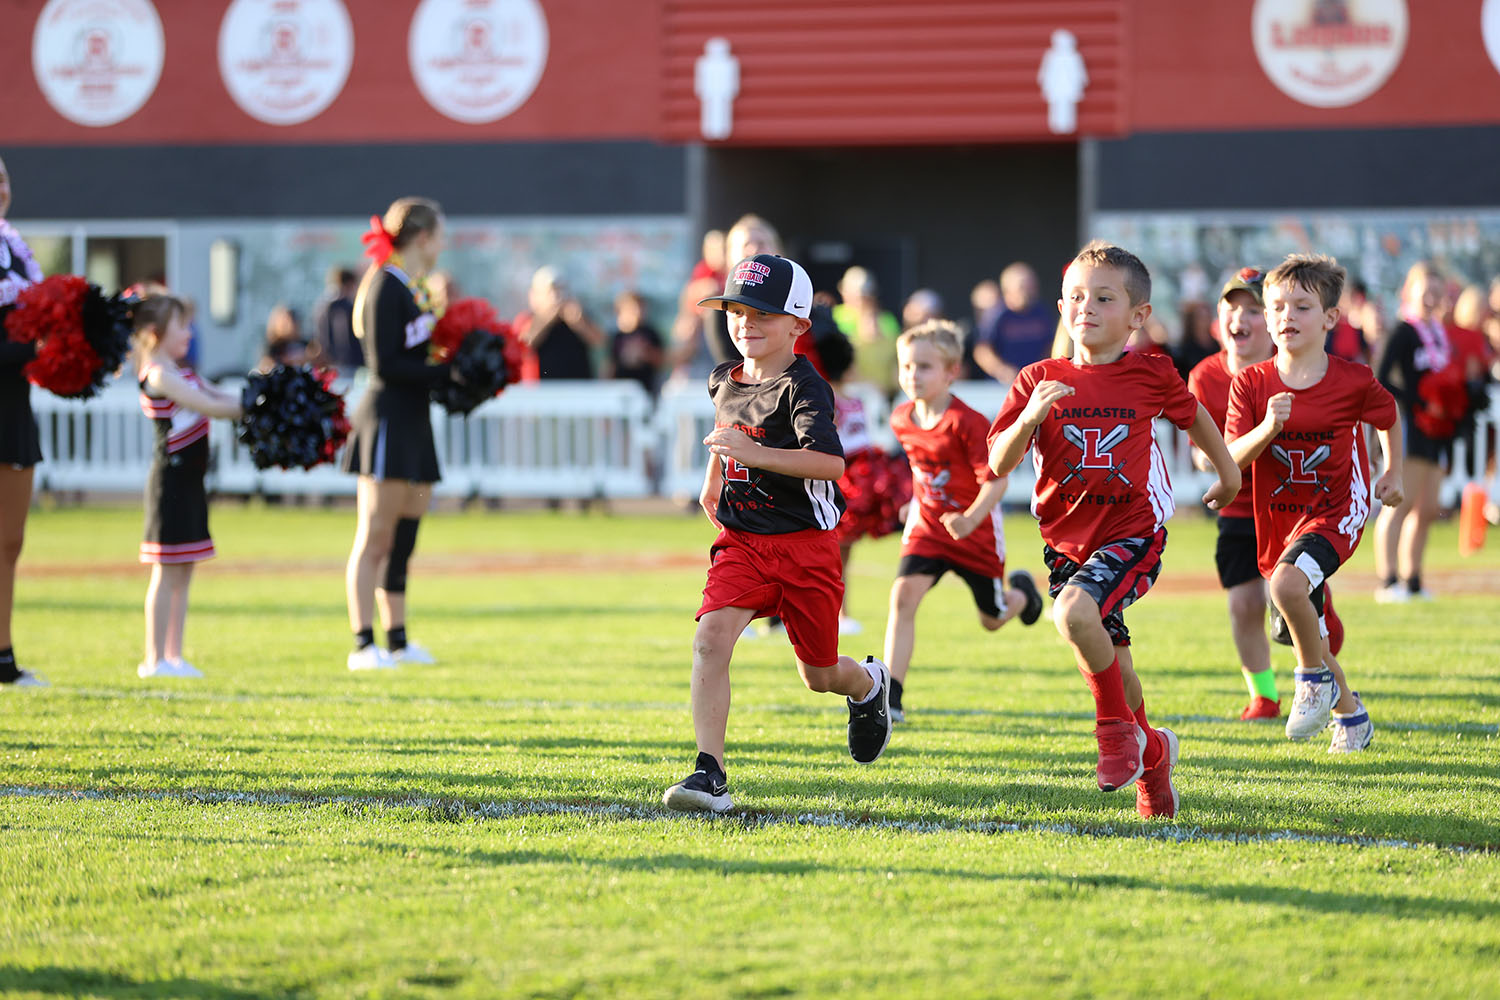 Lancaster youth football players running on Foyle-Kling Field